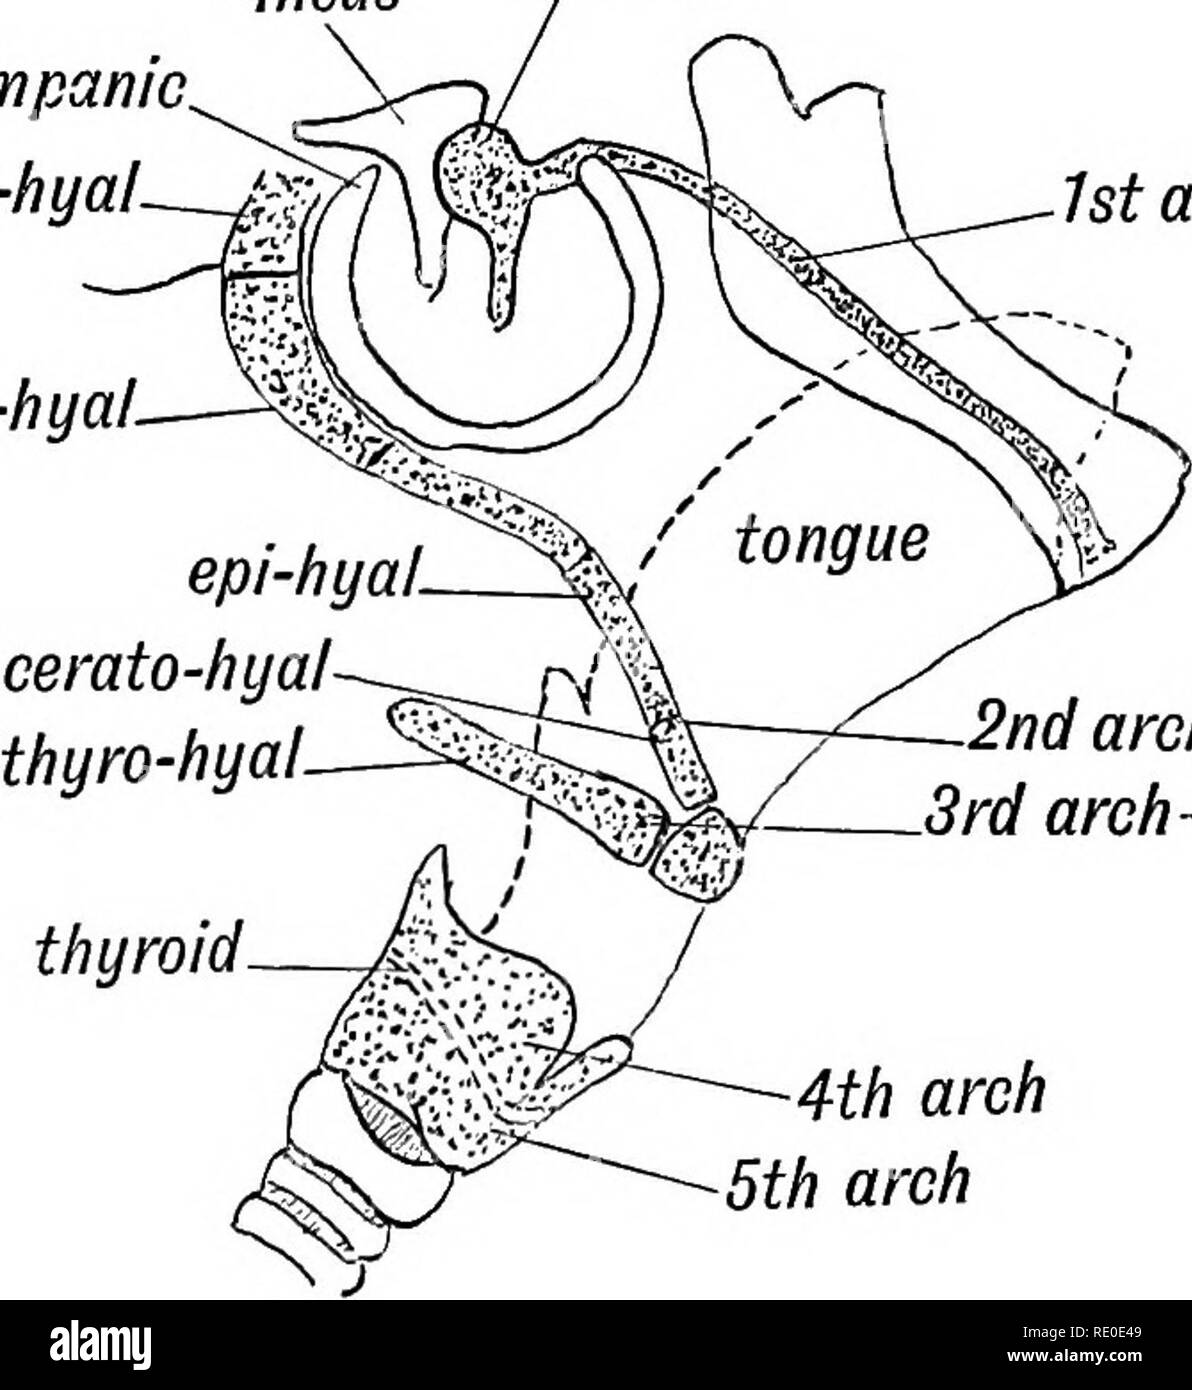 . Human embryology and morphology. Embryology, Human; Morphology. 34 HUMAN EMBRYOLOGY AND MORPHOLOGY. arches come to form the bone of the tongue. The skeletal part of the hyoid arch suspends the tongue. The great horn of the hyoid represents the cartilage of the 3rd arch (Fig. 26). The formation of the larynx and lungs from incus malleus tympanic tympano-hyal. stylo-hyal.. arch—Meckel's cart. arch—stylo-hyoid thyro-hyoid 4th arch 5th arch Fig. 26.—Showing what hecome of the Cartilages of the Visceral Arches. the ventral part (floor) of the pharynx renders it difficult to say what becomes of th Stock Photo